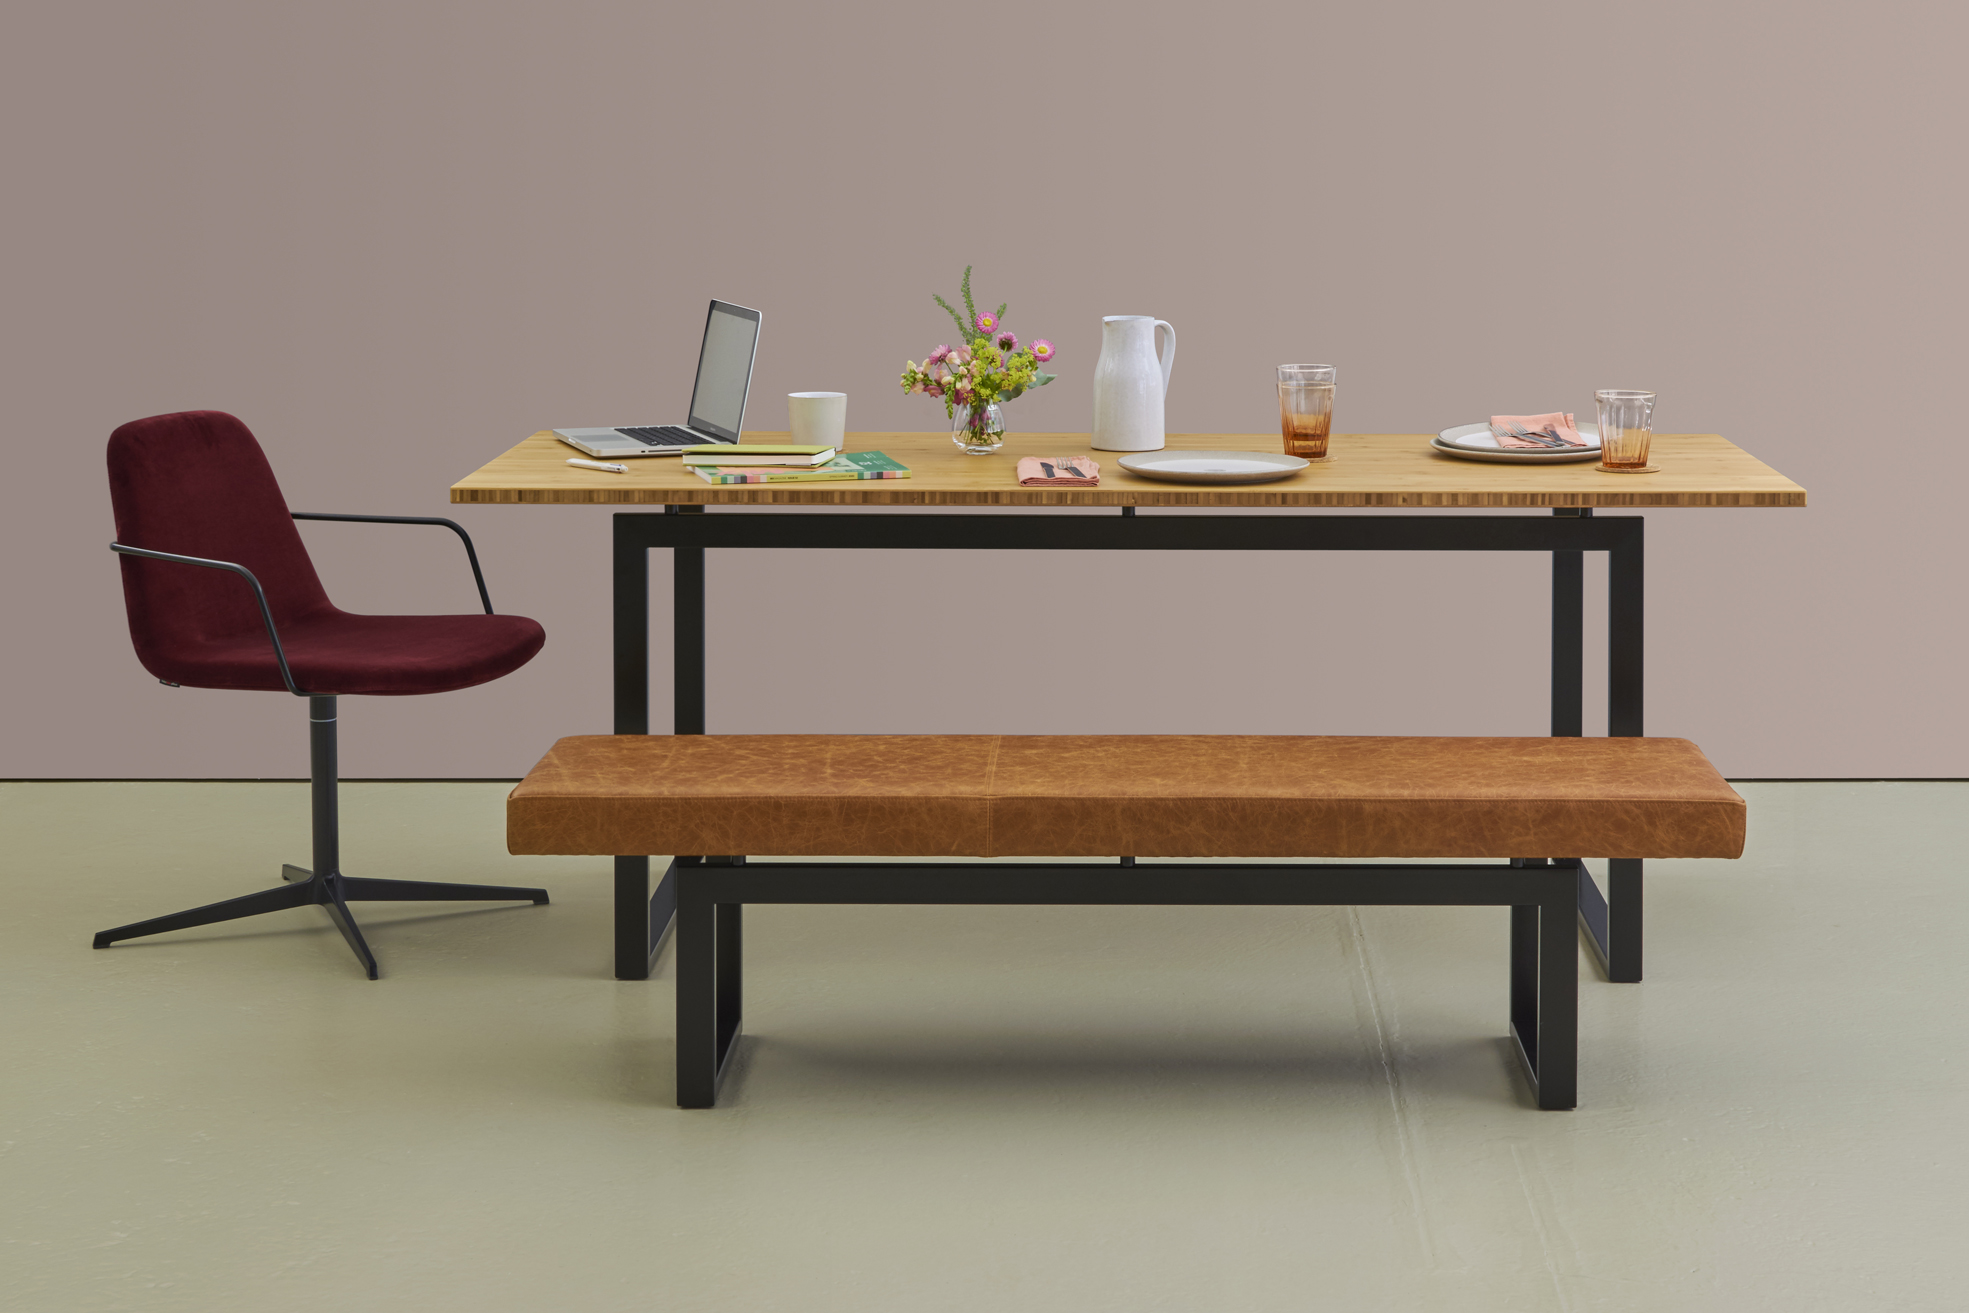 hm107b bamboo table with hm106a bench and hm58f armchair (1) (low res).jpg